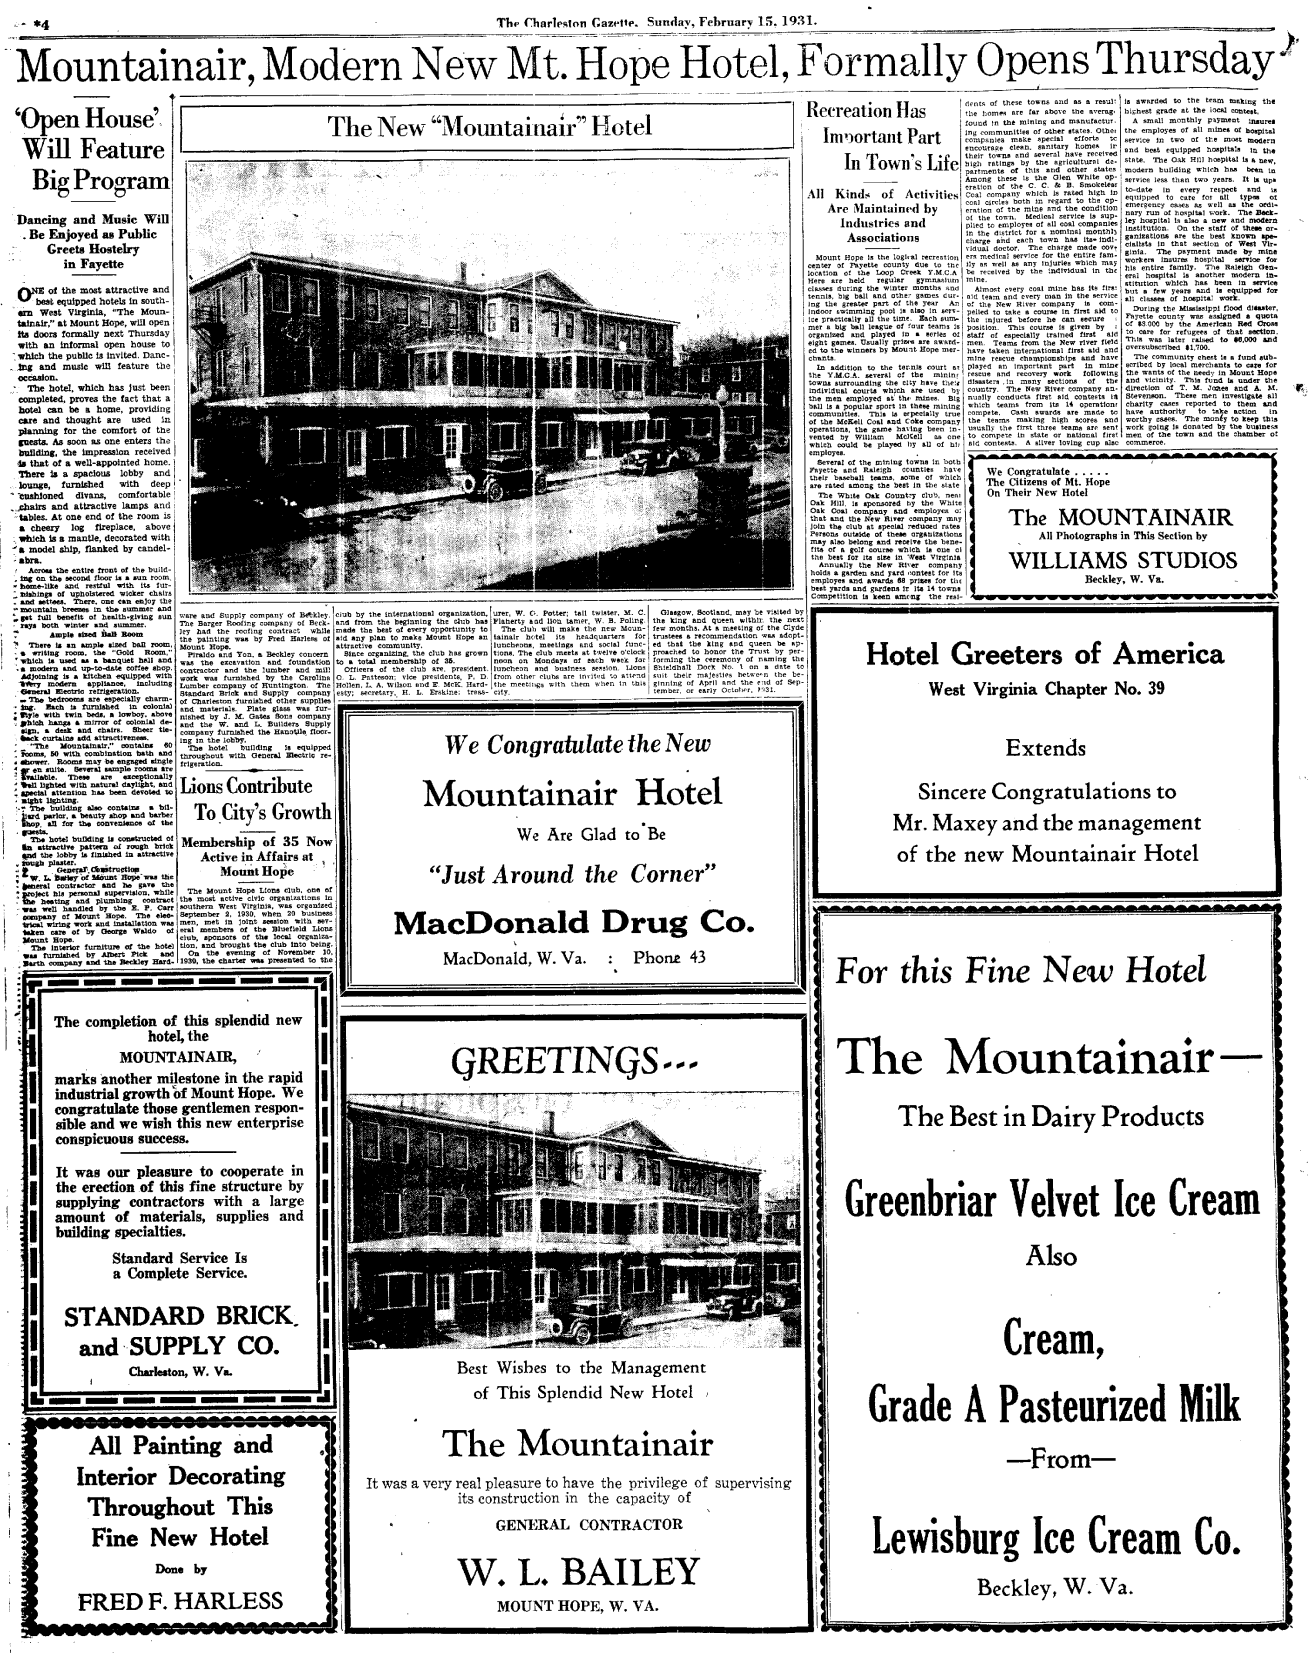 This is part of a special section of the Charleston Gazette that featured all the amenities of the town of Mount Hope offered travelers to the area.  